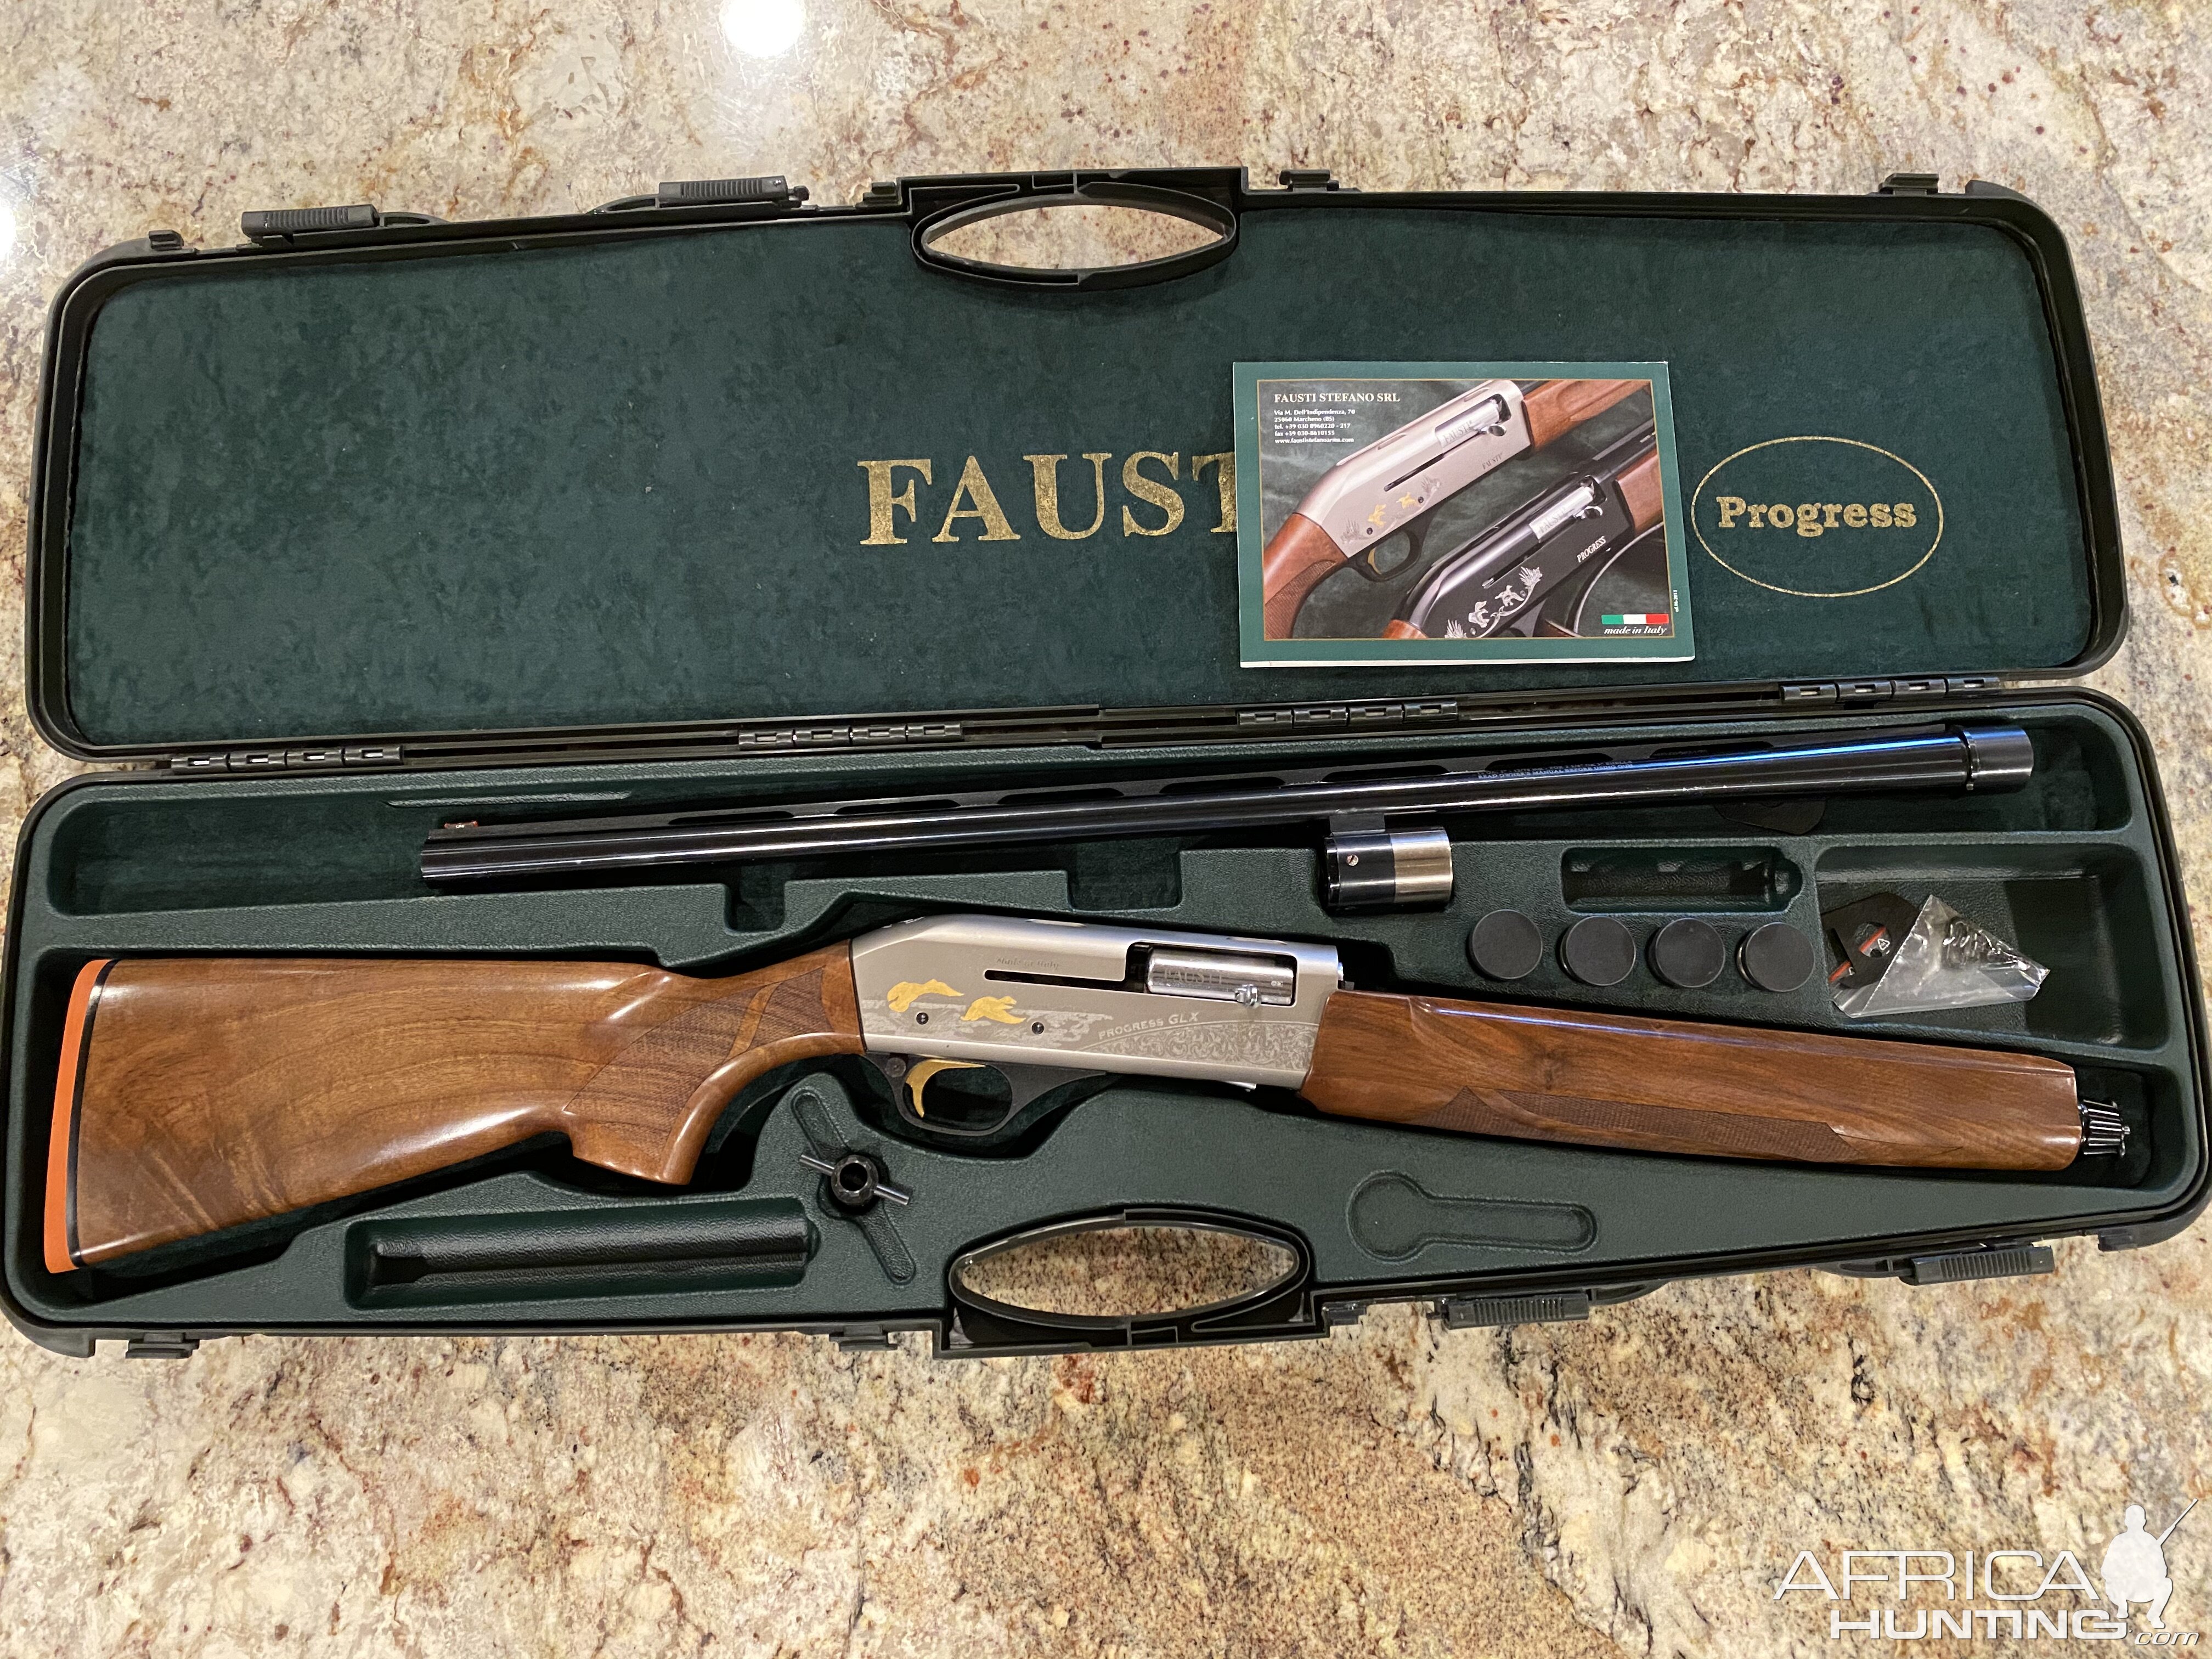 Fausti Limited Edition SCI Rifle